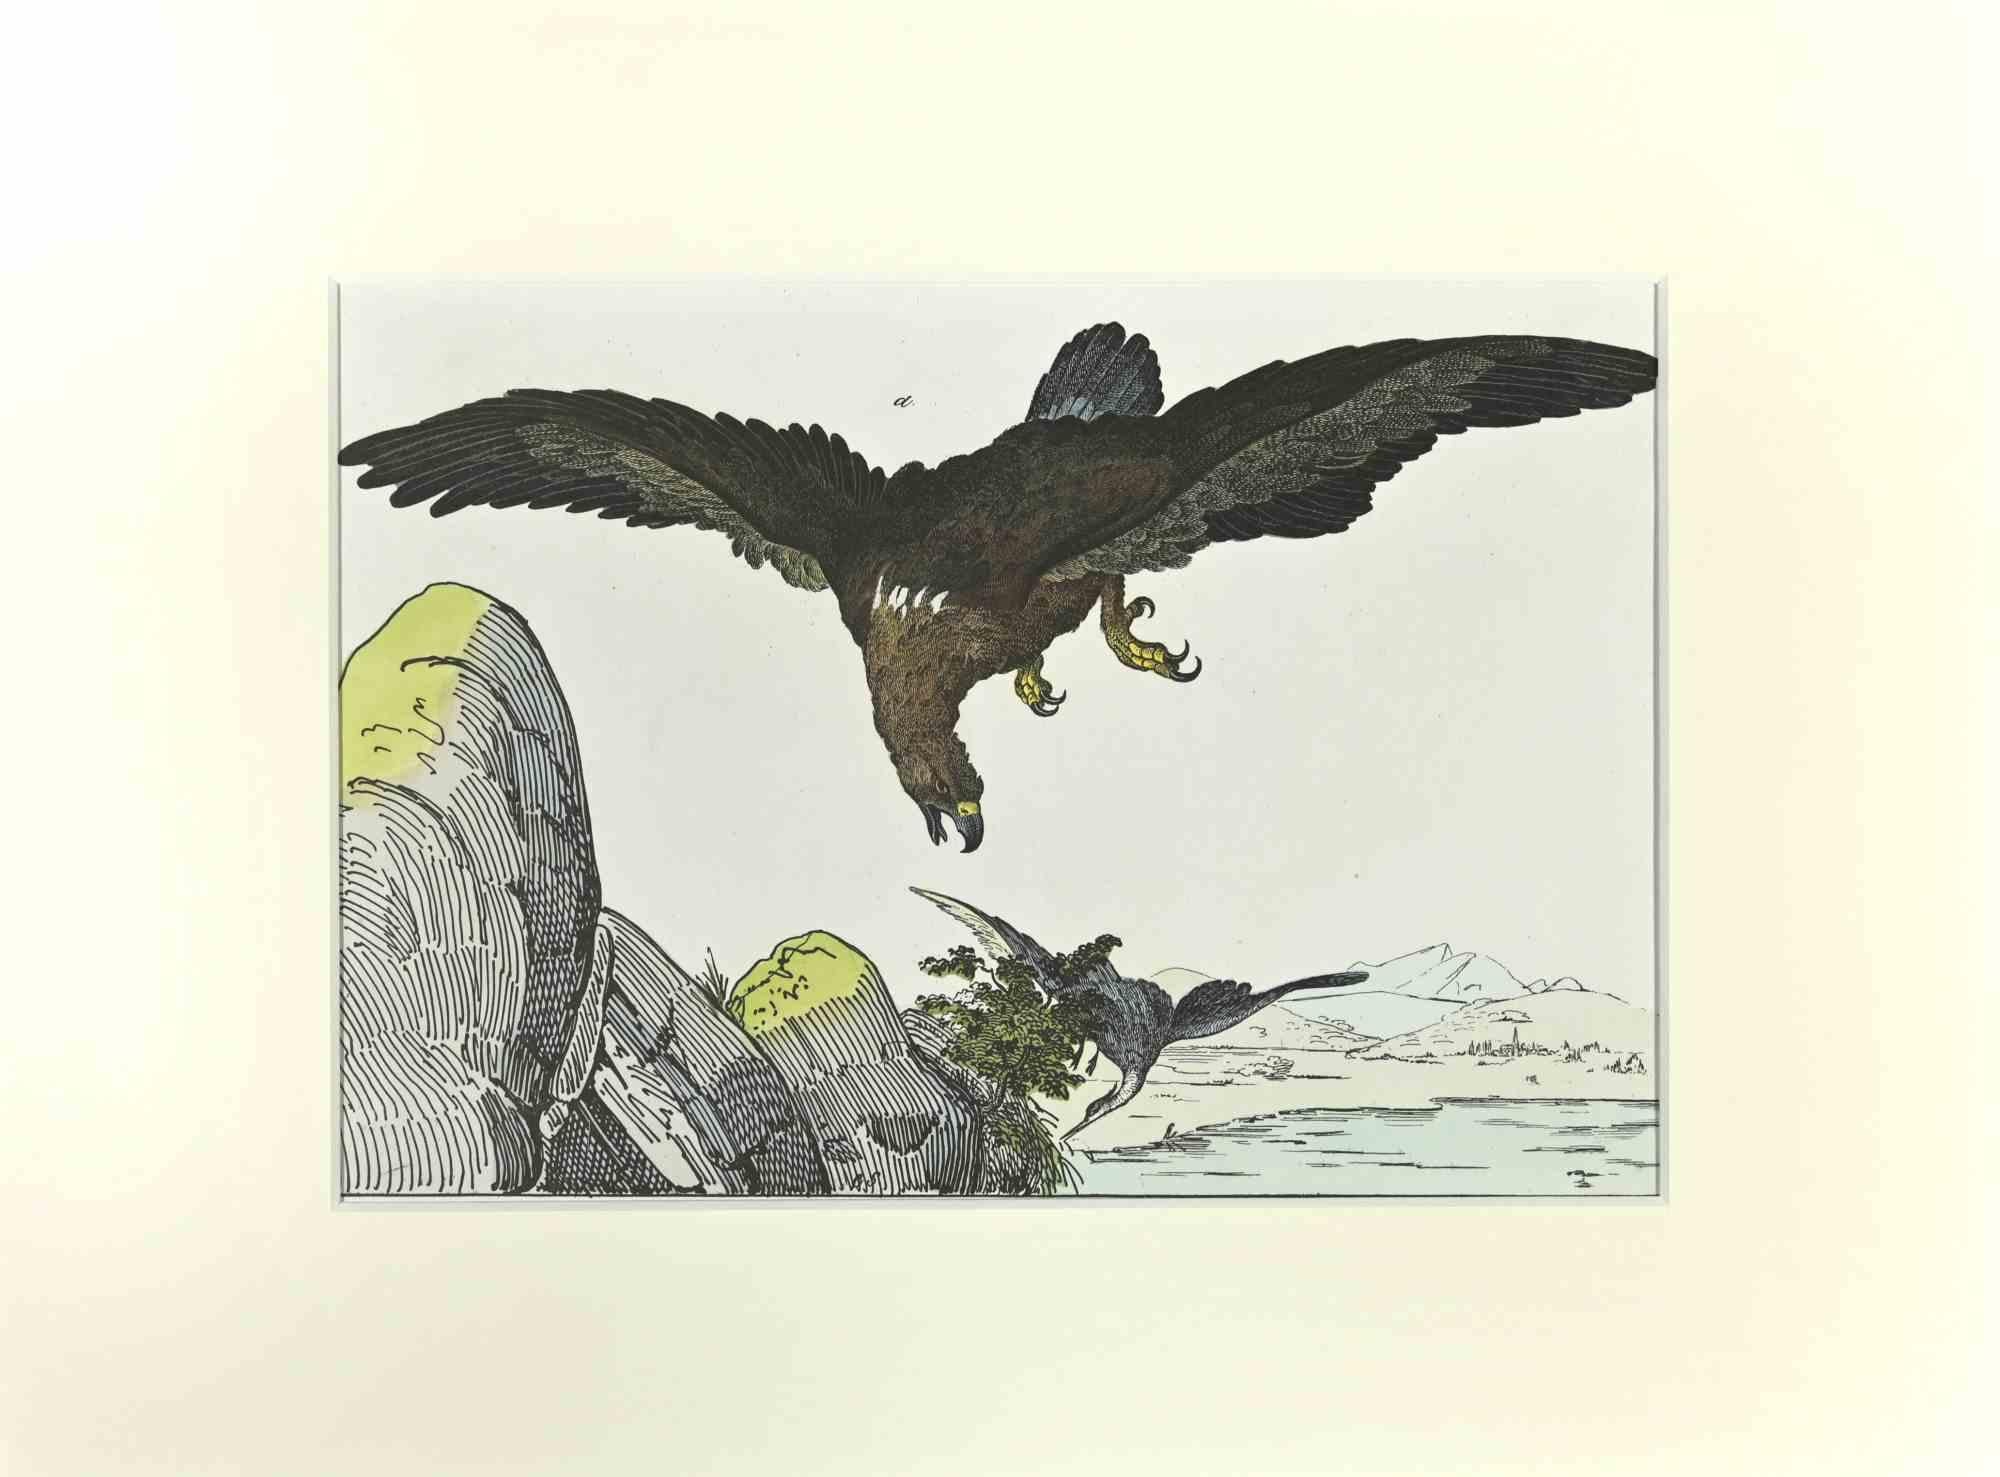 Eagle is an etching hand colored realized by Gotthilf Heinrich von Schubert - Johann Friedrich Naumann, Illustration from Natural history of birds in pictures, published by Stuttgart and Esslingen, Schreiber and Schill 1840 ca. 

Illustration